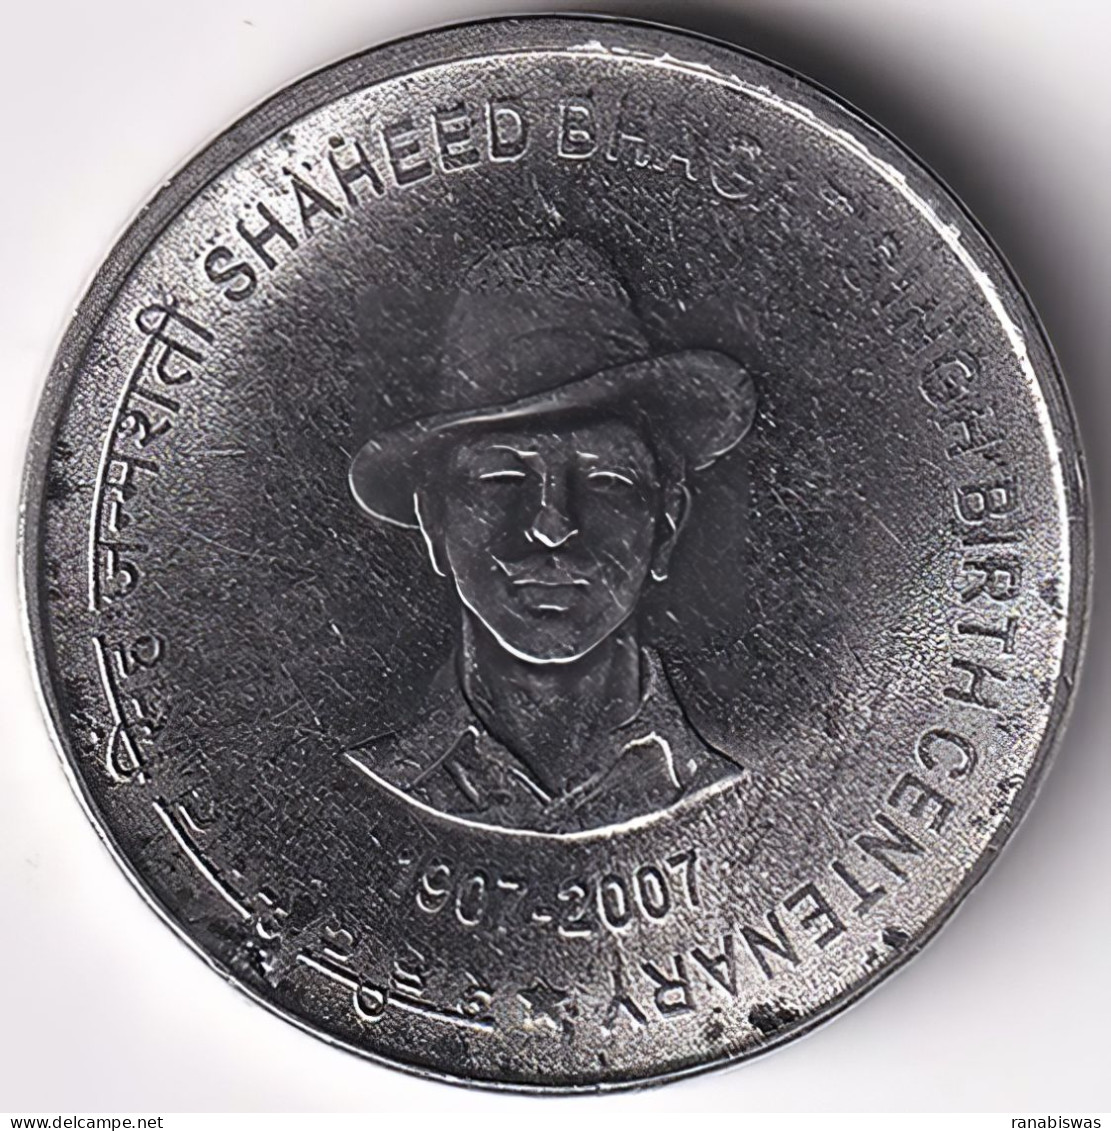 INDIA COIN LOT 142, 5 RUPEES 2007, BHAGAT SINGH, HYDERABAD MINT, UNC - India